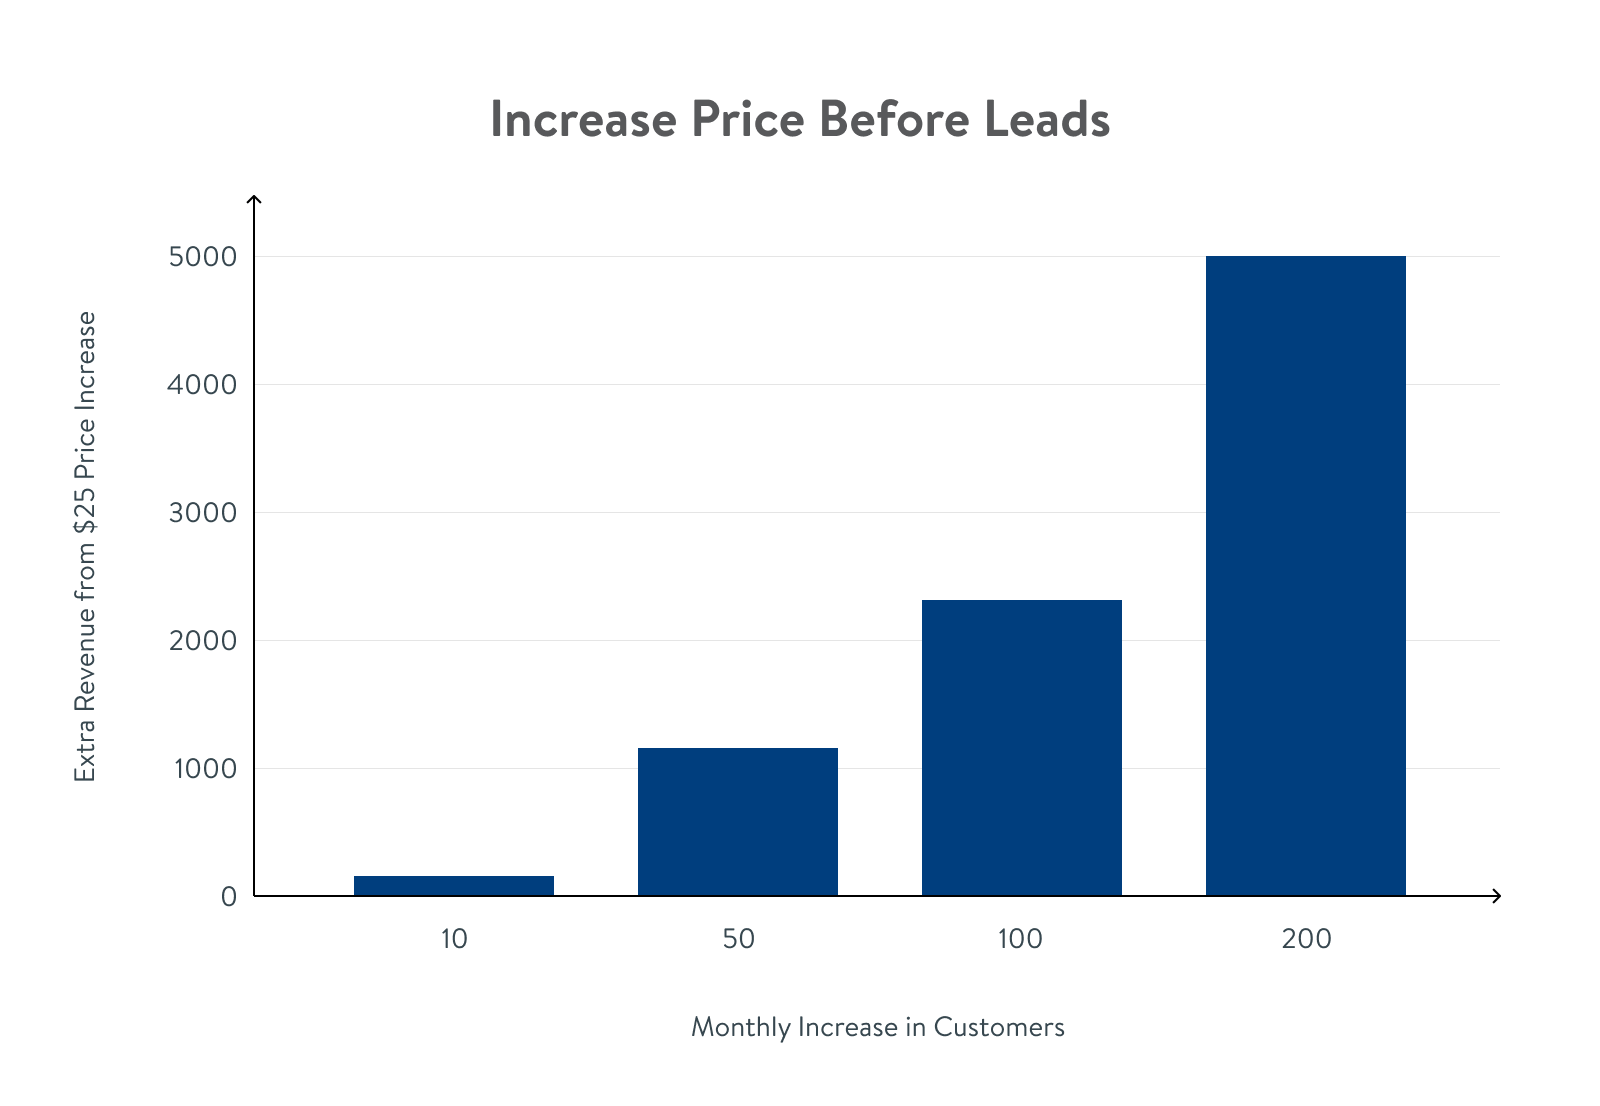 A bar graph showing Increase Price Before Leads (extra revenue from a $25 price increase and its benefits).